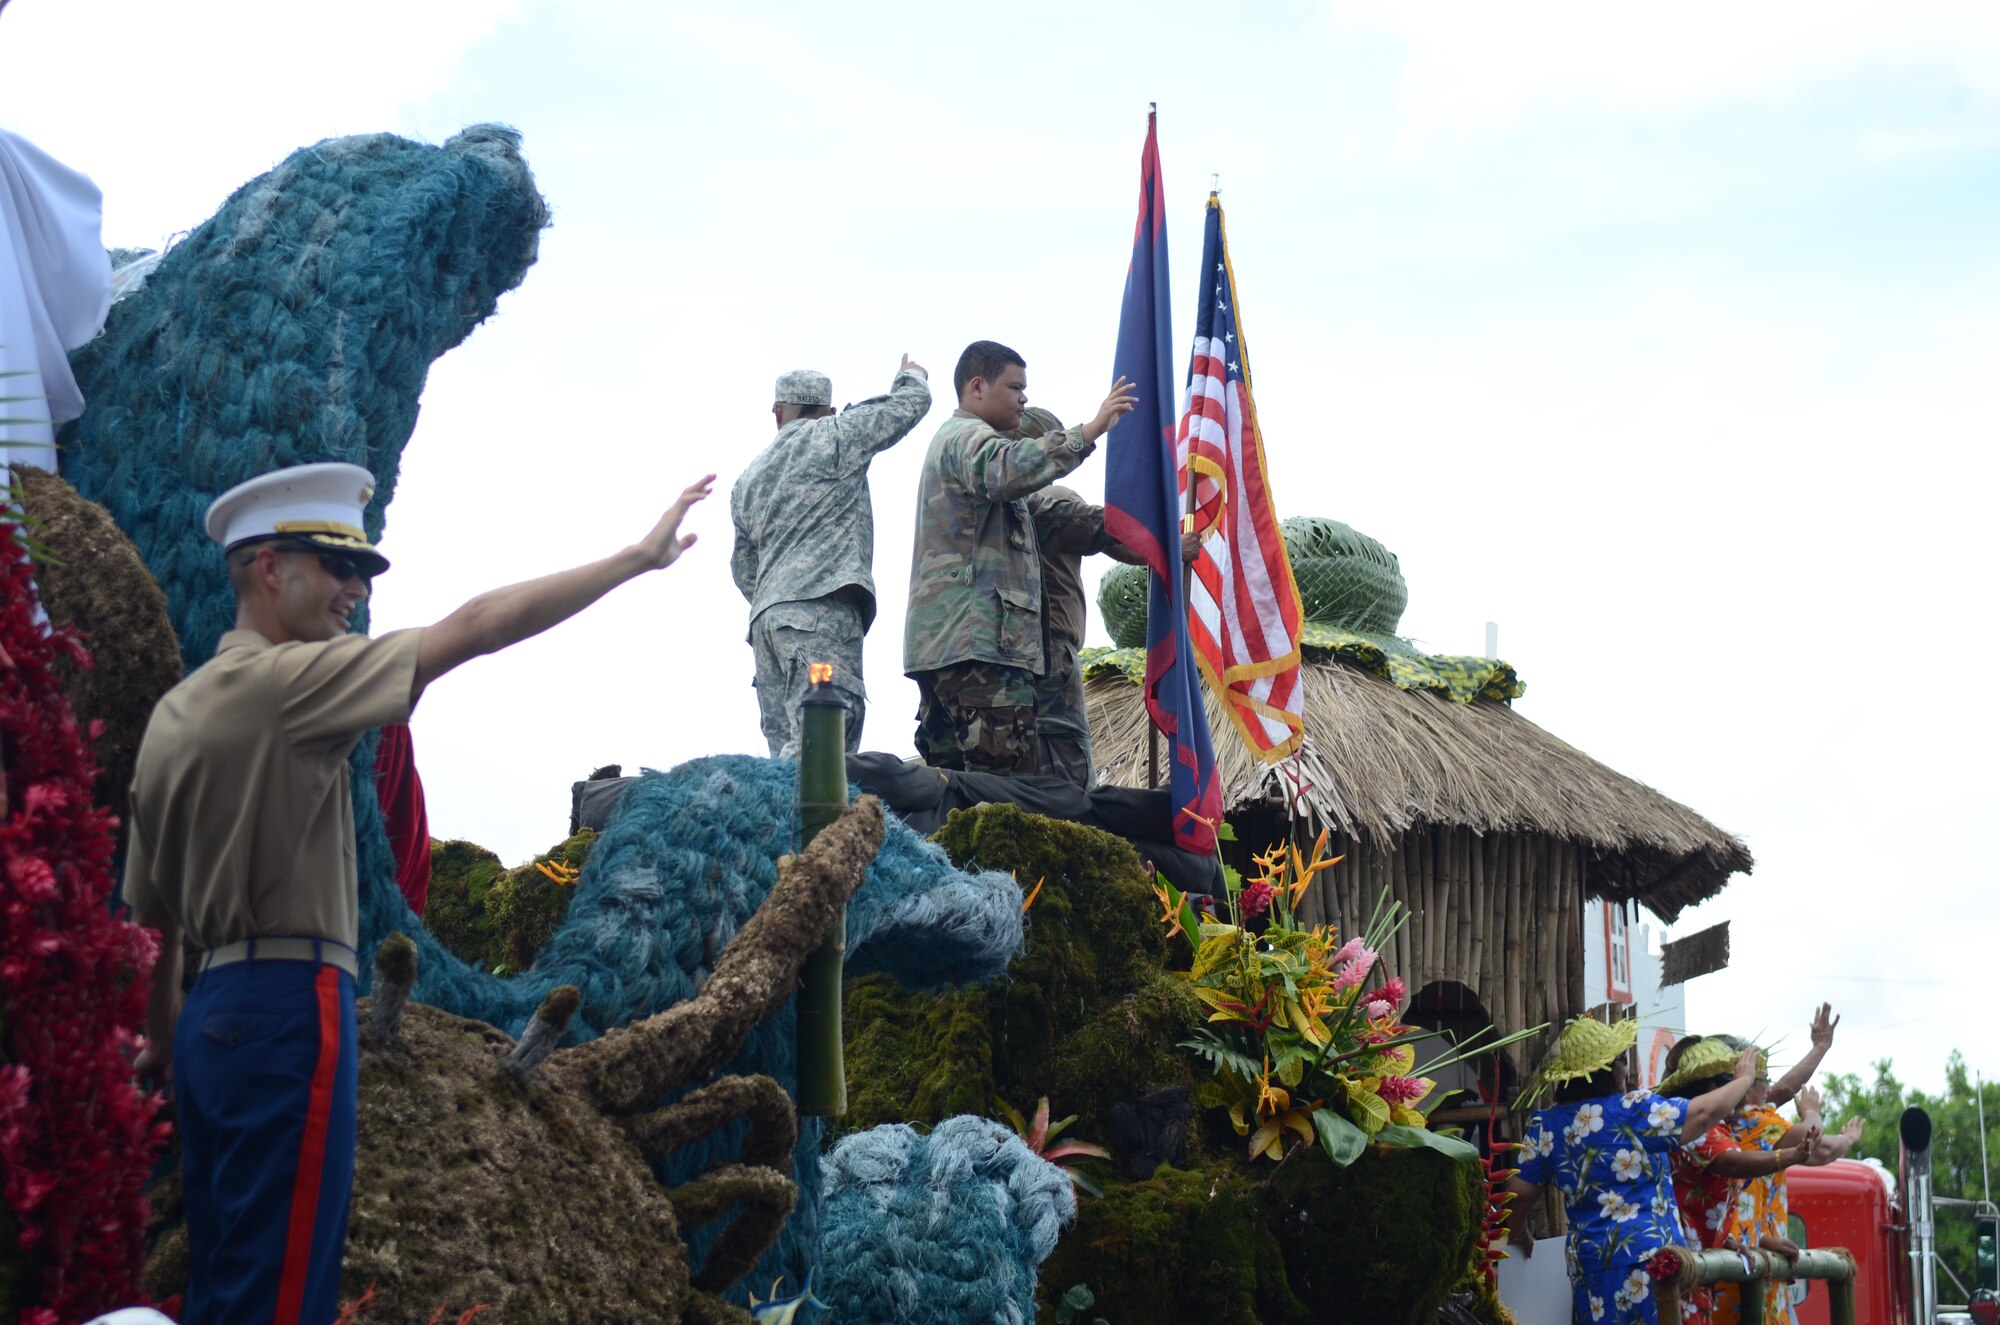 Service members join residents of Santa Rita, Guam, on the village’s float to wave as they pass the crowd during the 69th Liberation Day parade in Hagåtña, Guam, July 21, 2013. The parade commemorated the United States freeing the island from imperial Japan’s control during the Second Battle of Guam, which began July 21, 1944, and lasted for 21 days. (U.S. Air Force photo by Staff Sgt. Brok McCarthy/Released)